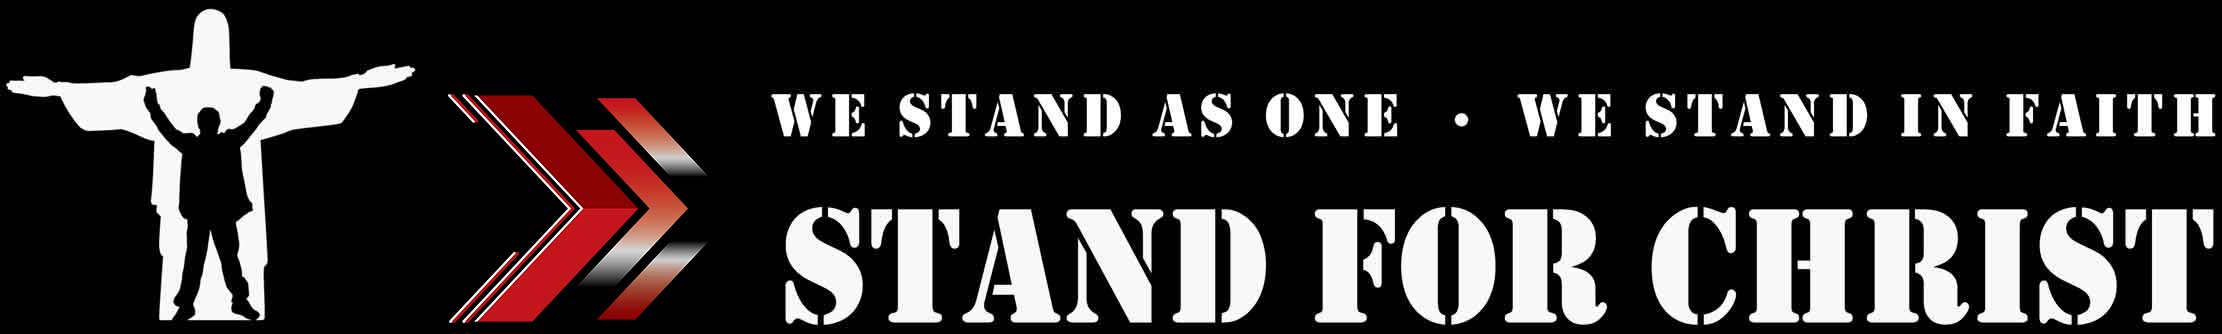 we stand as one, we stand in faith, stand for Christ logo